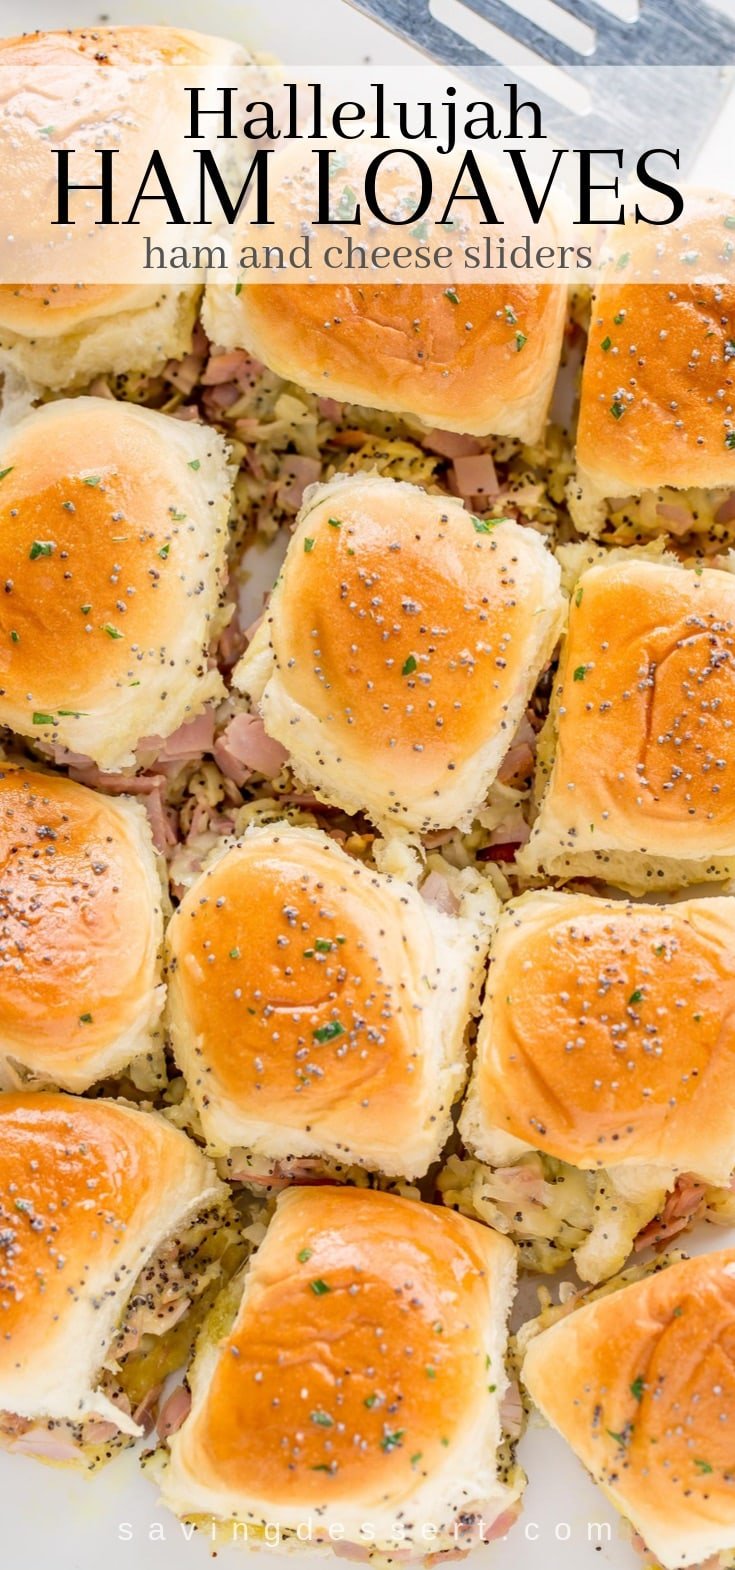 A platter of ham and cheese slider sandwiches topped with poppy seeds